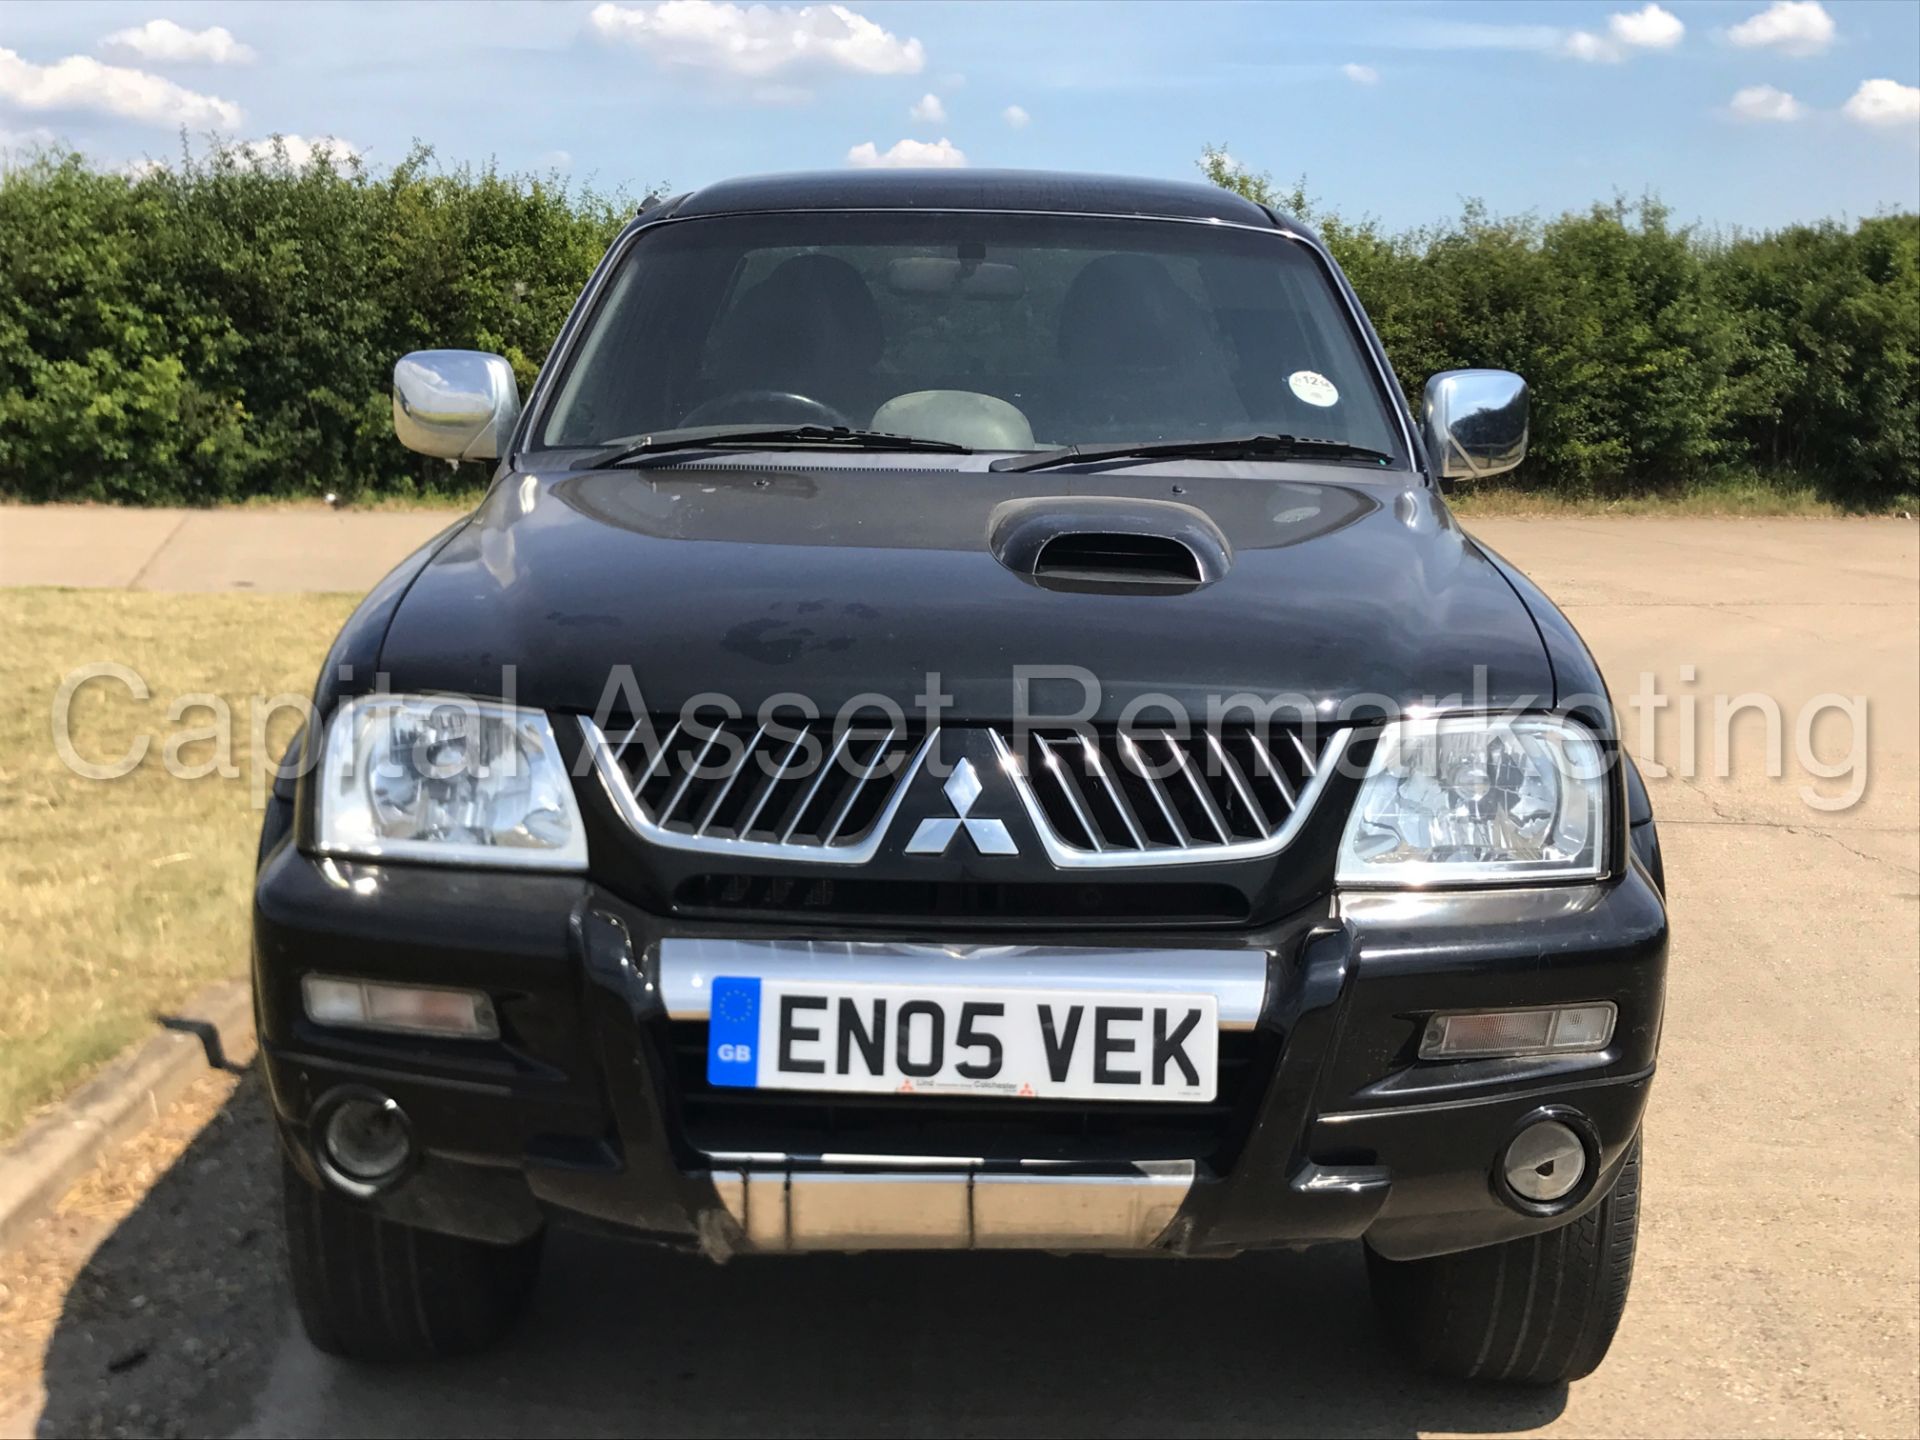 (On Sale) MITSUBISHI L200 'WARRIOR' DOUBLE CAB PICK-UP (2005) '2.5 DIESEL - AIR CON' (NO VAT) - Image 3 of 25